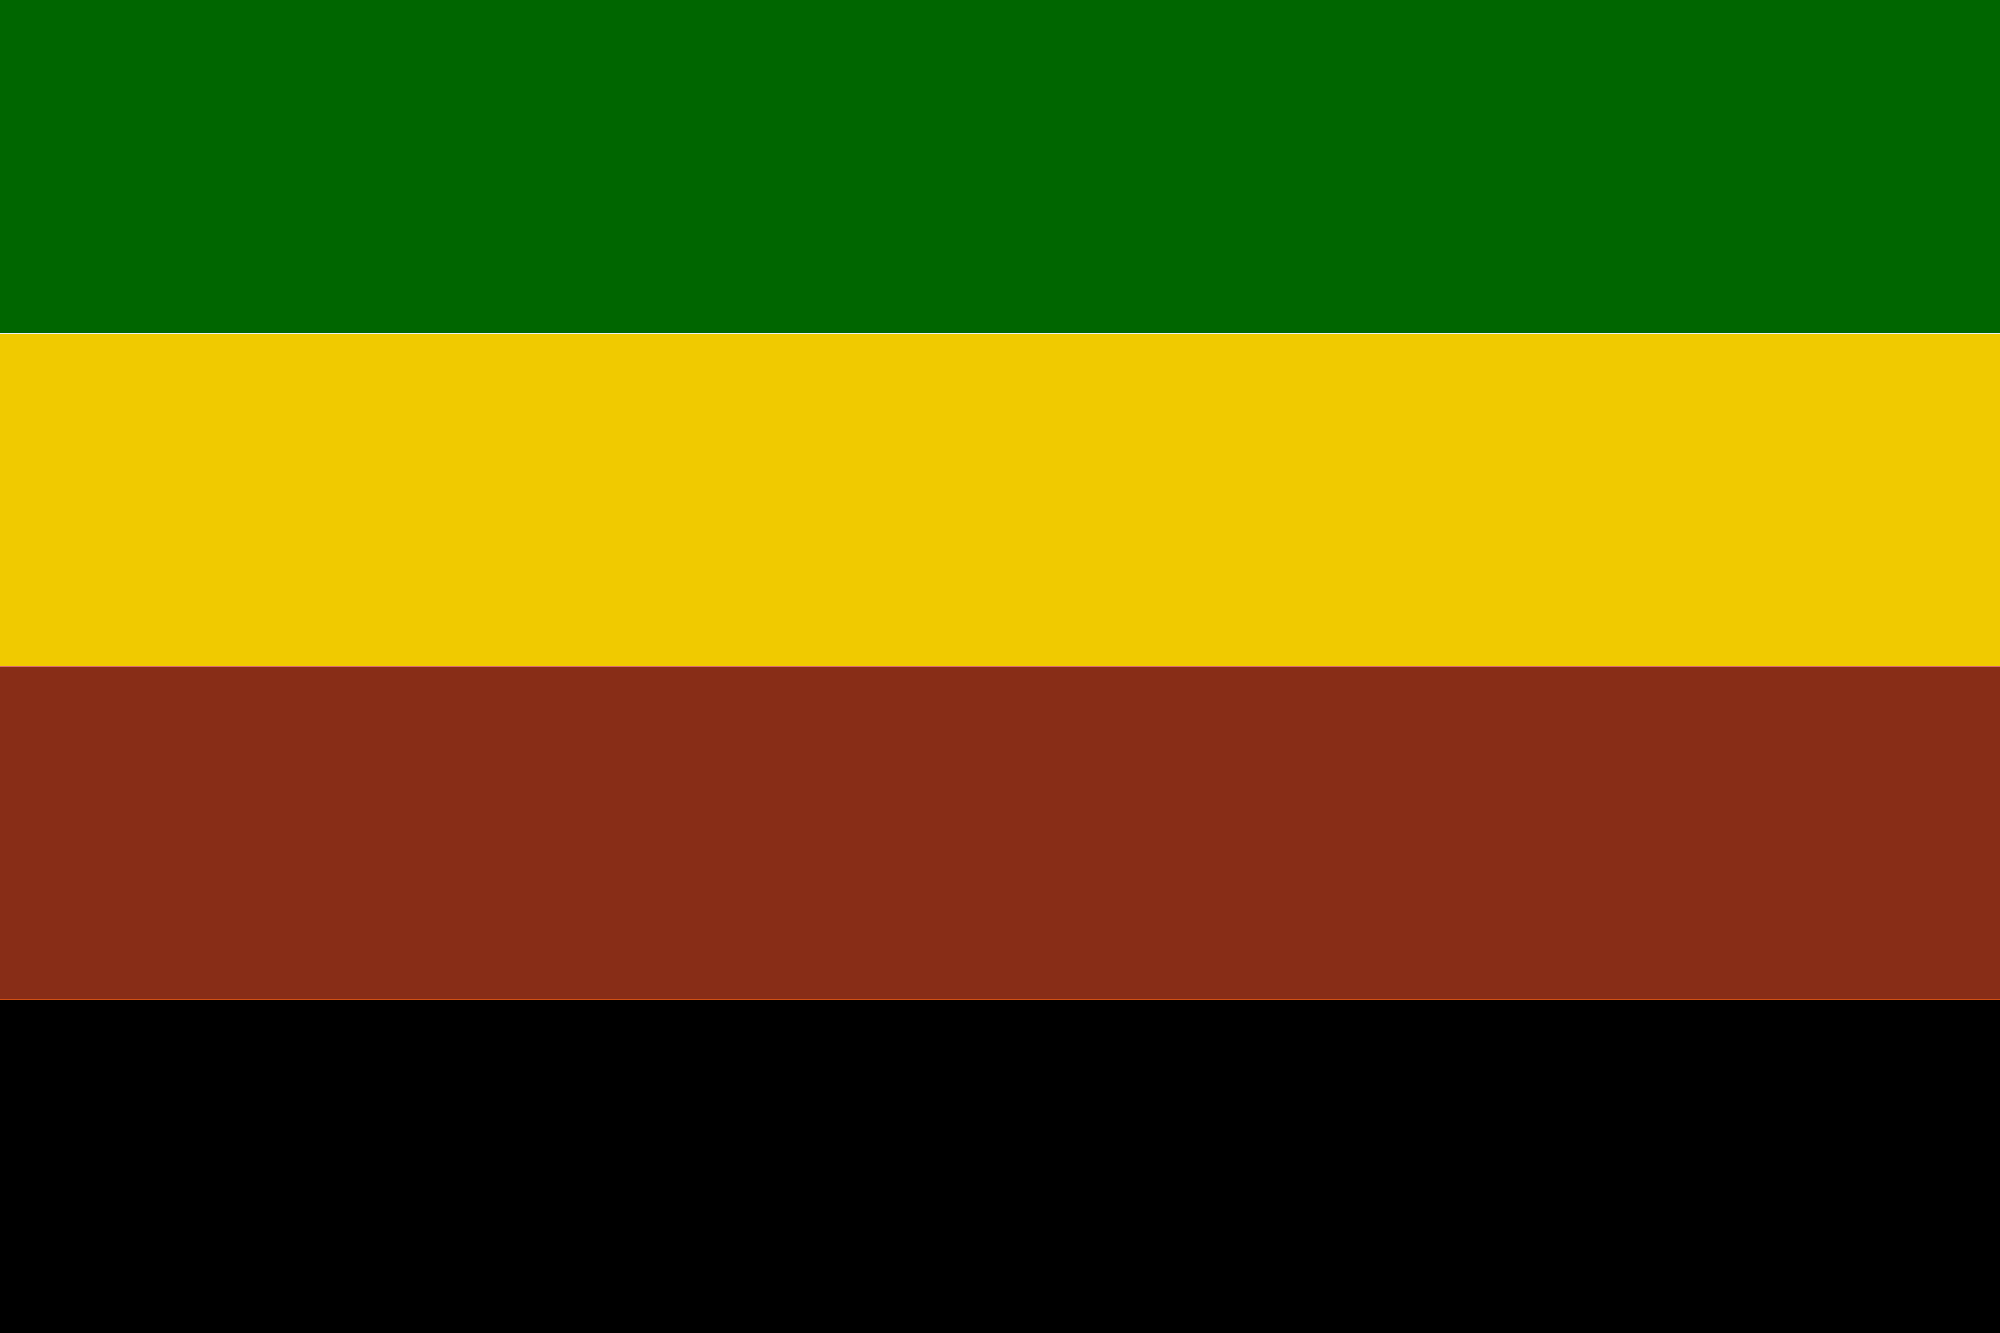 Green Black and Gold Logo - File:Flag Dark Green Gold Sienna Black.png - Wikimedia Commons